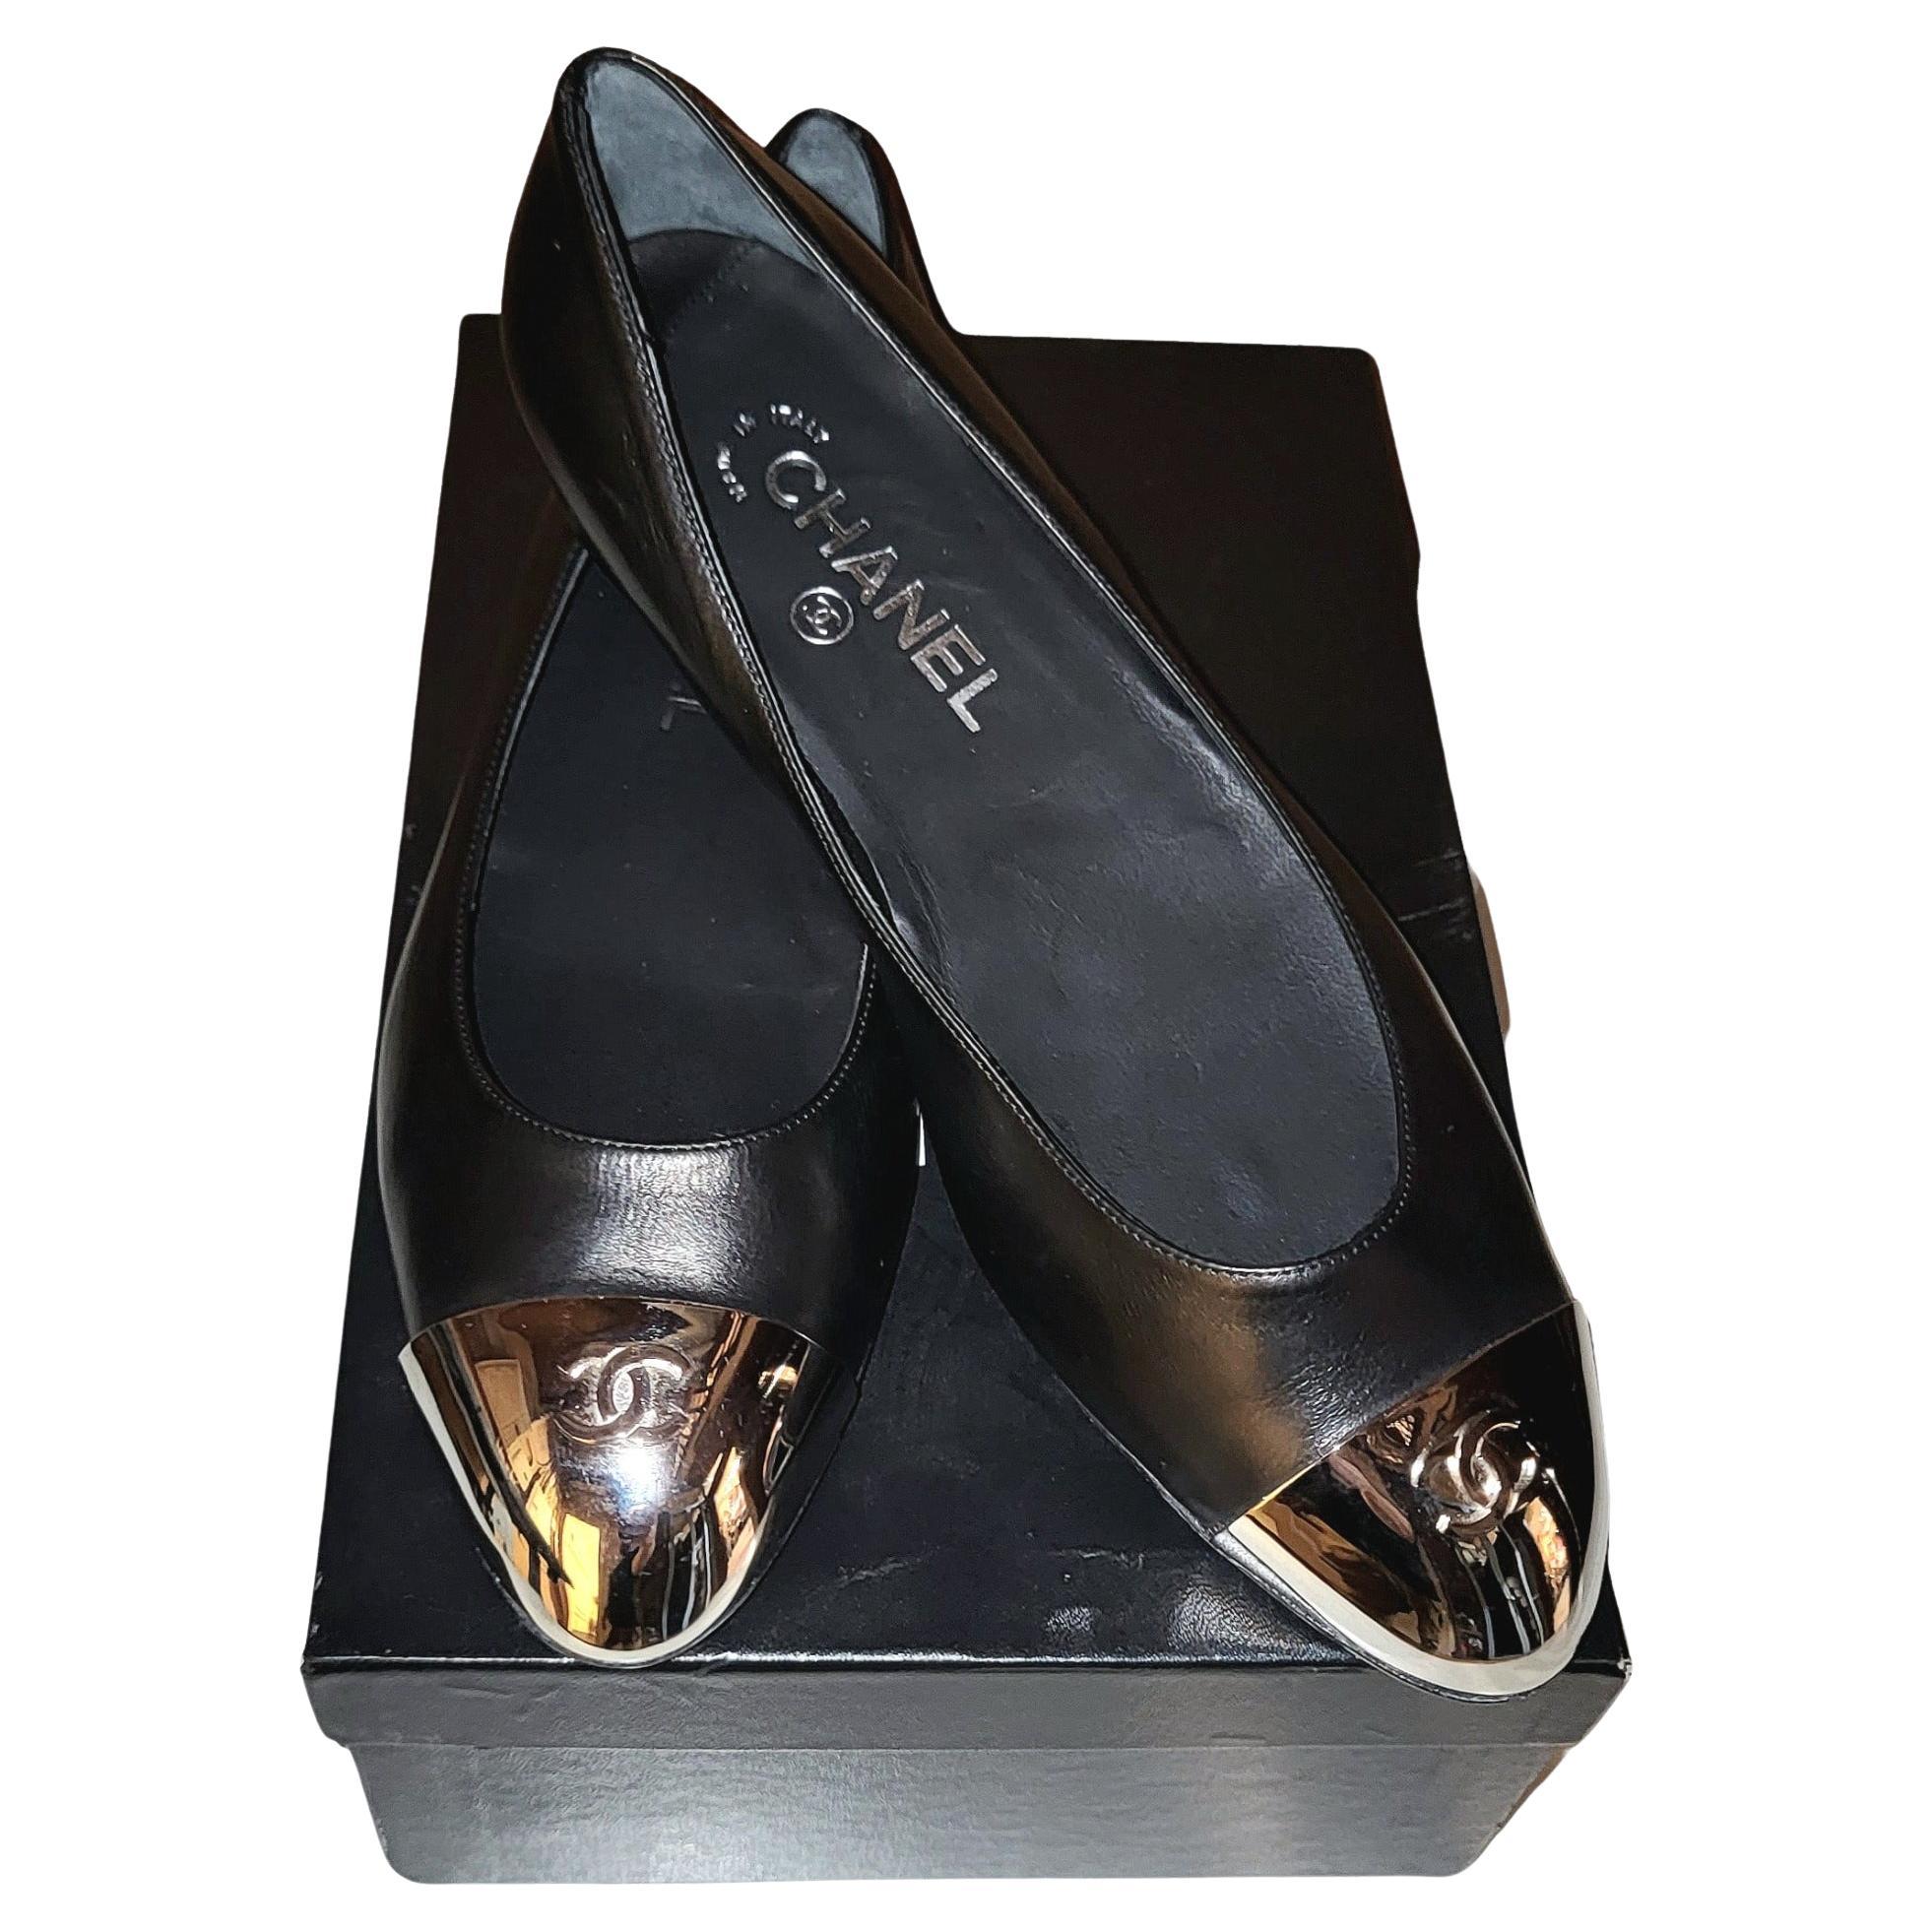 Rare Barnd New Ballerina Shoes With CC Chrome Accent For Sale